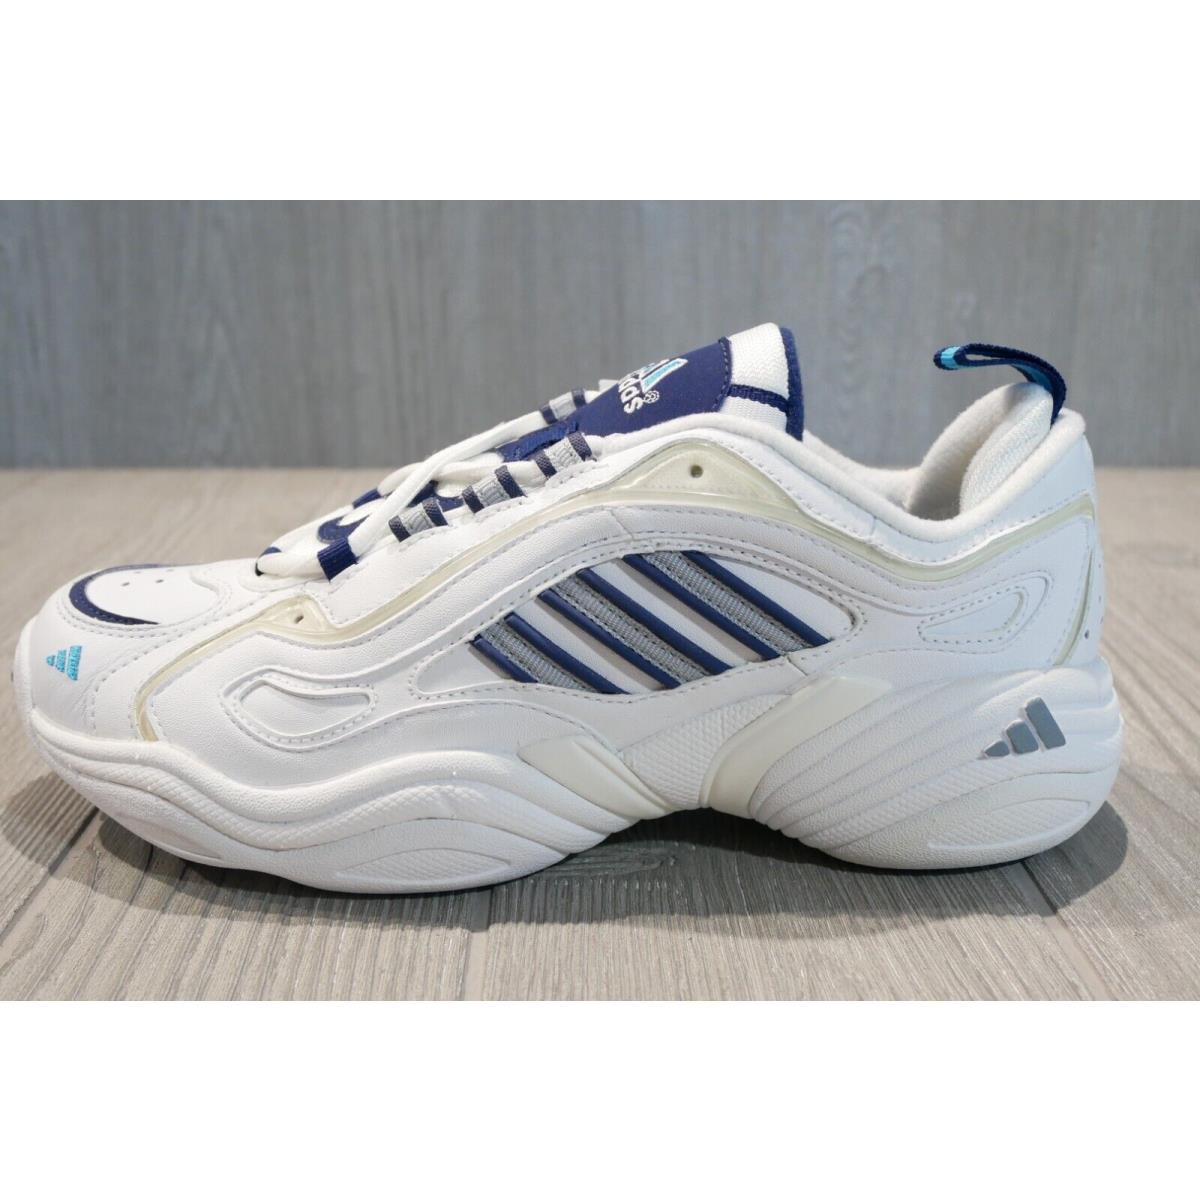 Vintage Adidas Response TR W White Blue Shoes Womens Size 8.5 Oss